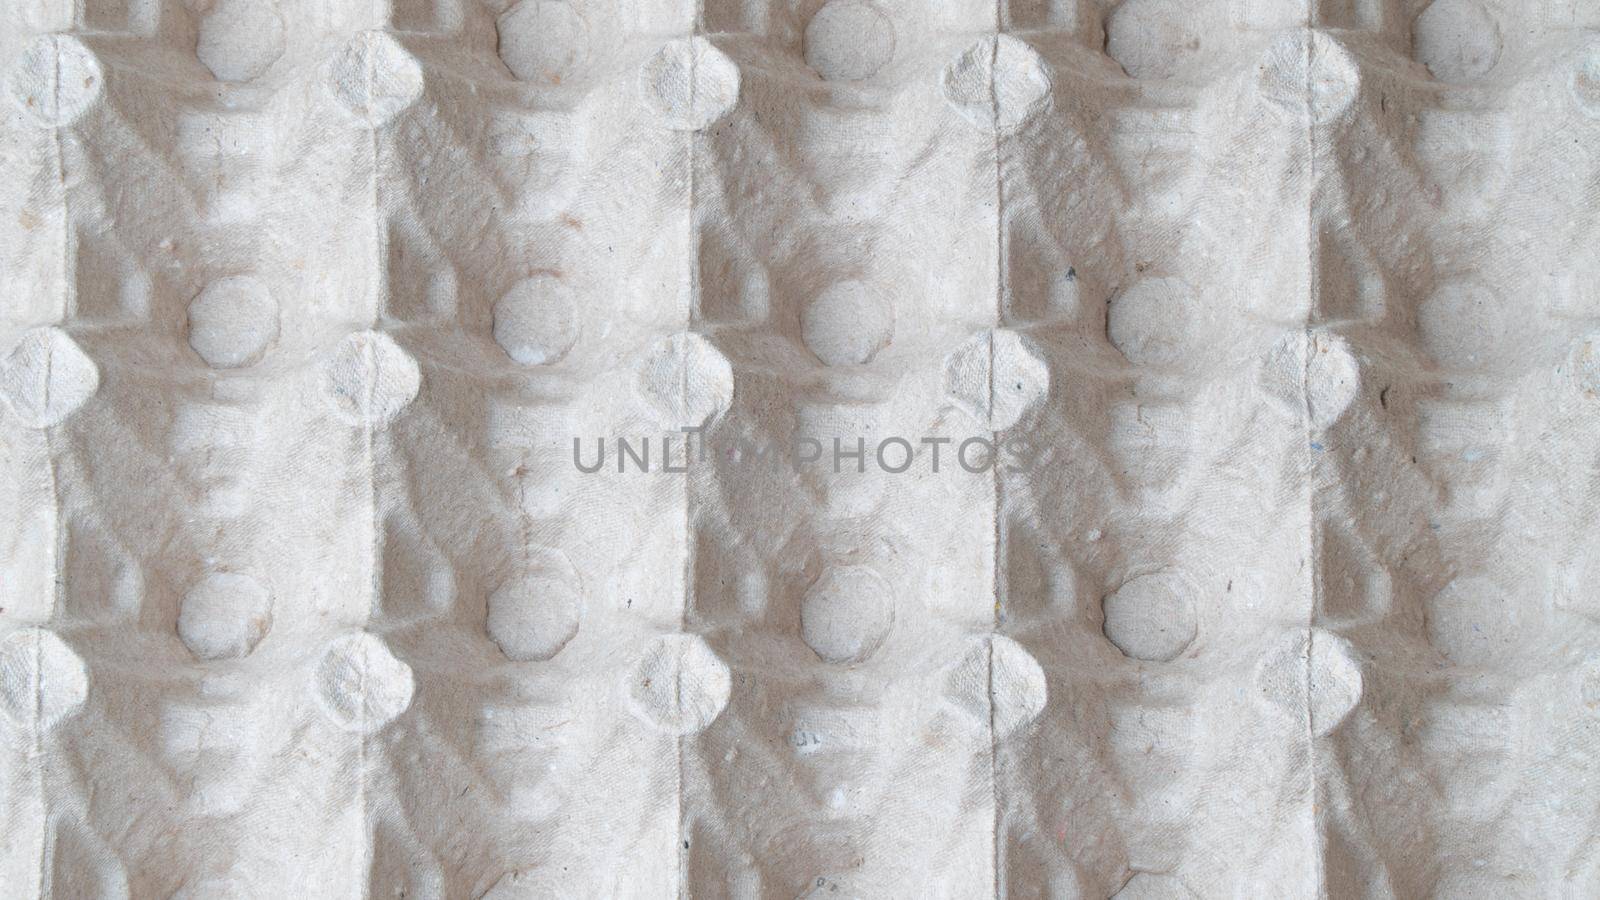 close-up egg lattice background three-dimensional pattern with bulges